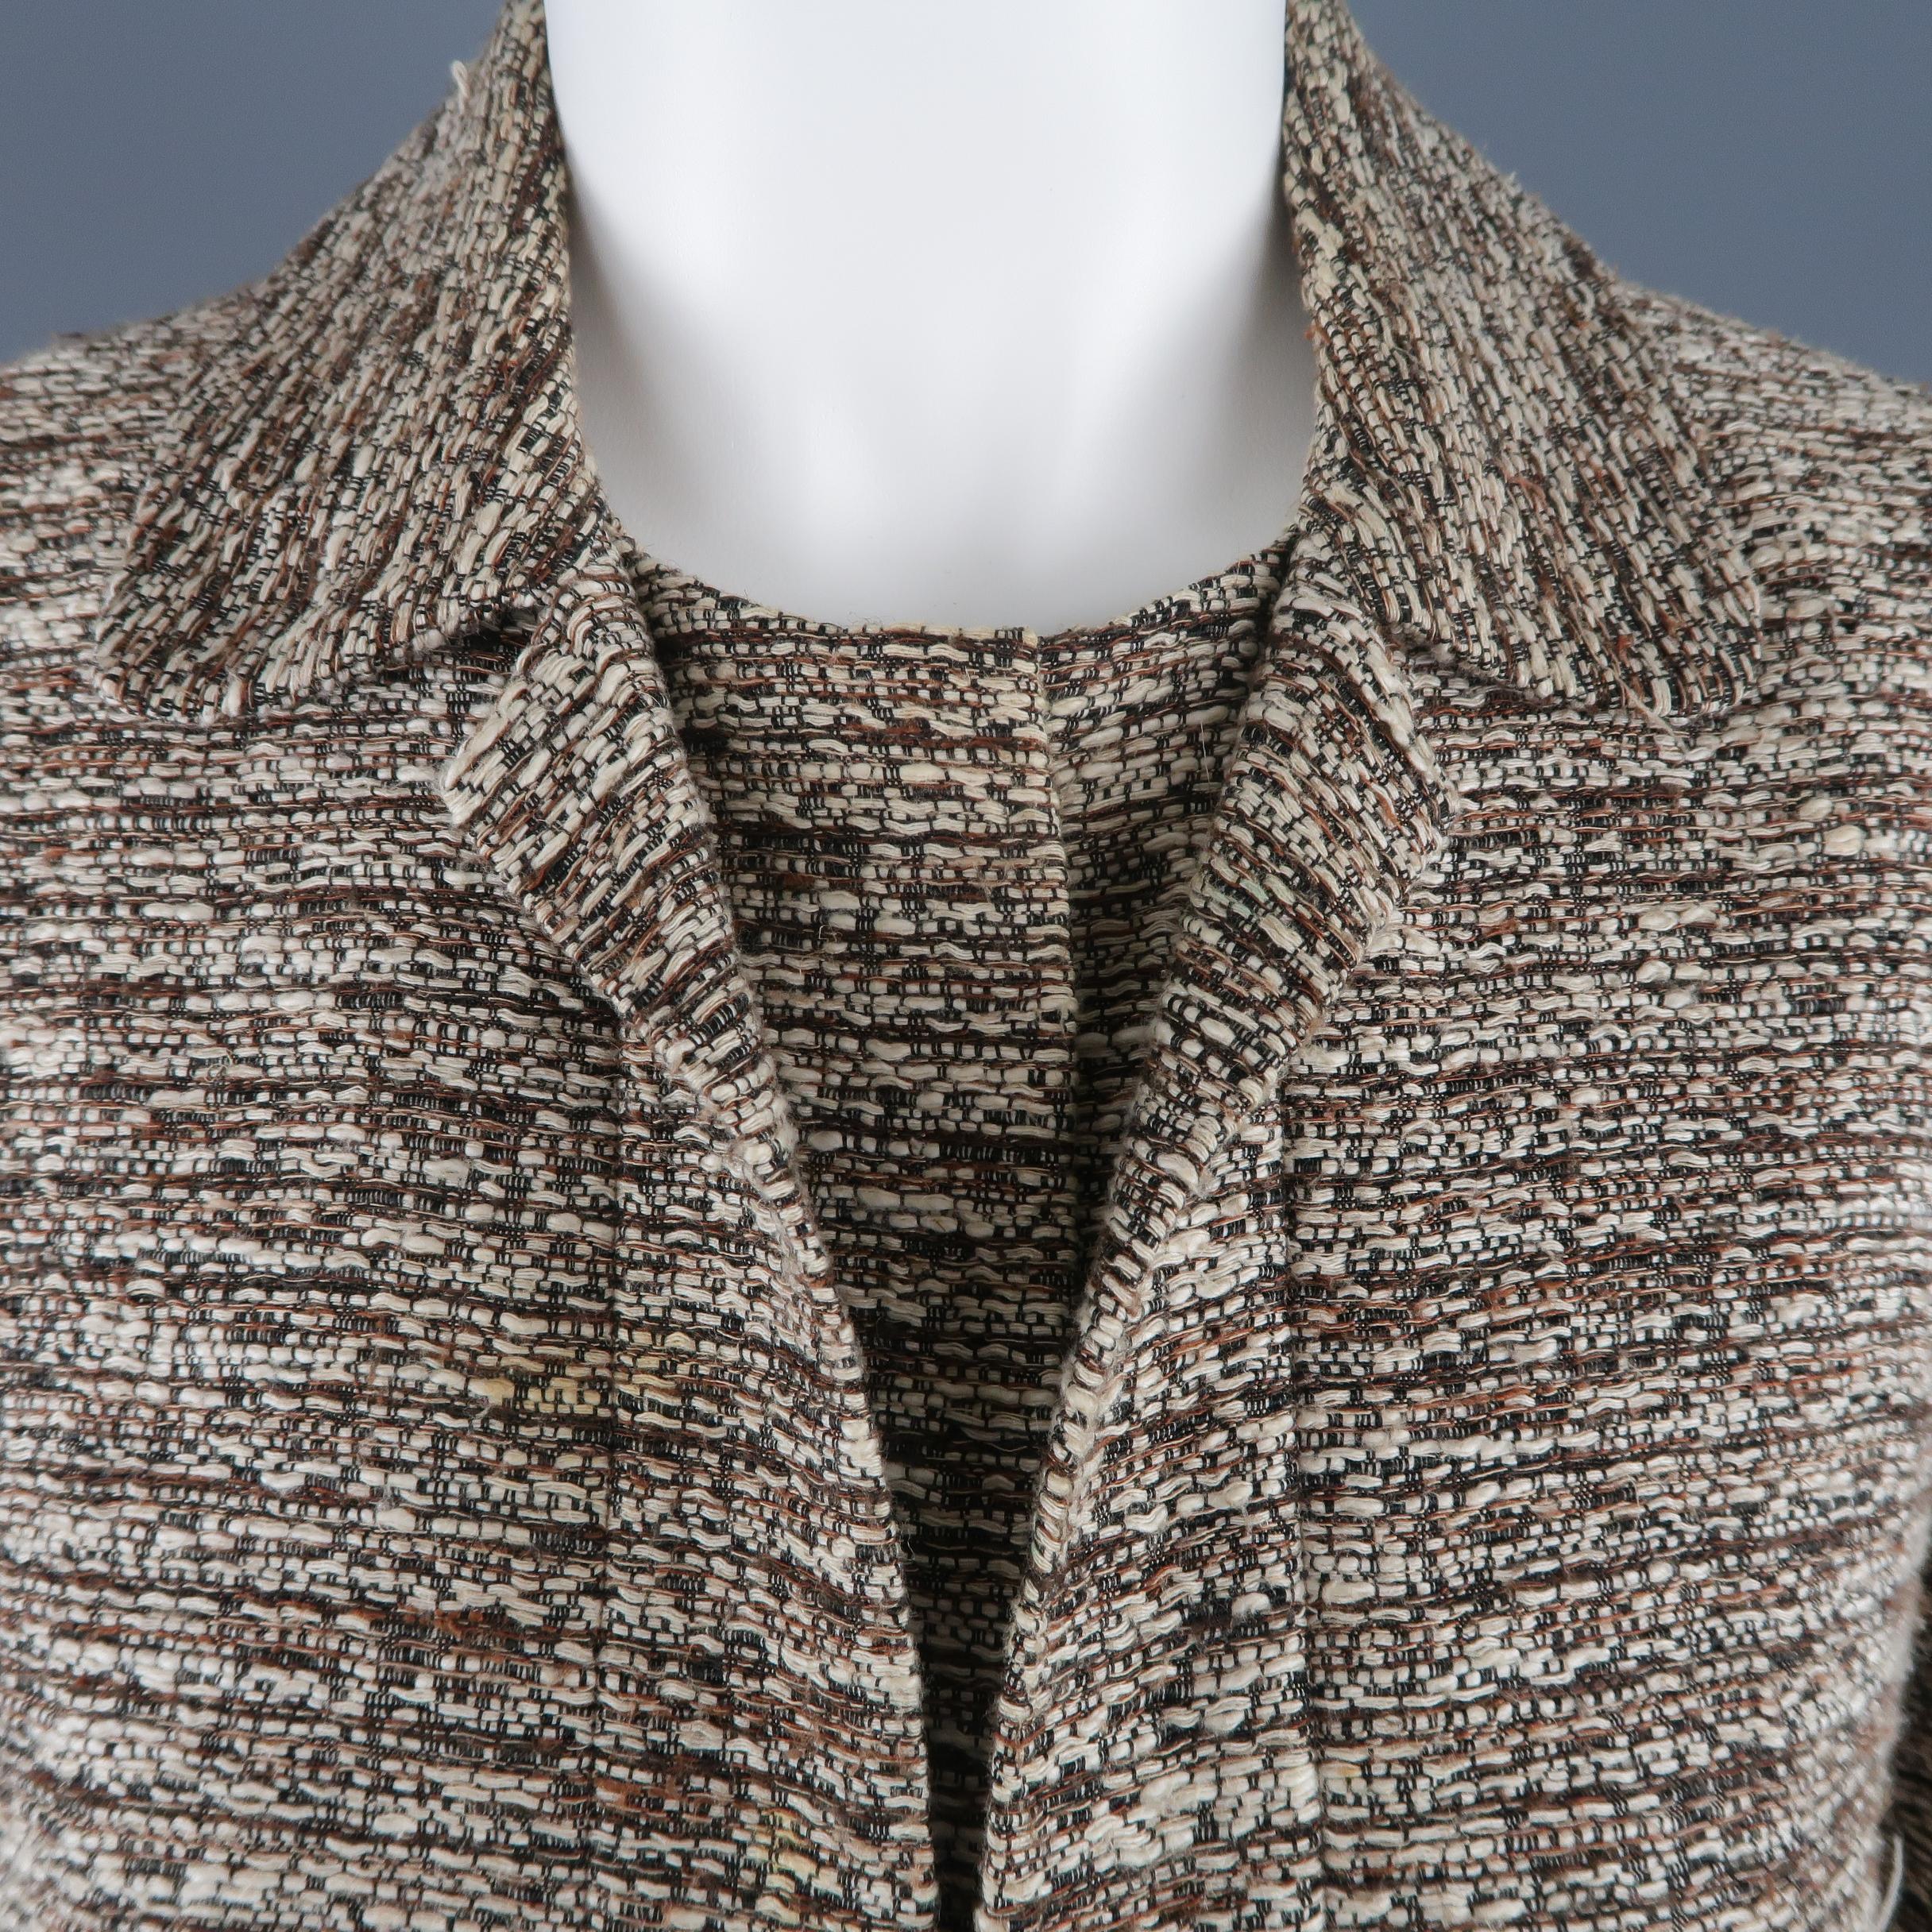 CHLOE jacket comes in cotton linen silk blend tweed with a pointed collar, faux flap pockets, and layered hidden snap closure. Stains on front. As -is. Made in France.
 
Fair Pre-Owned Condition.
Marked: 42
 
Measurements:
 
Shoulder: 15 in.
Bust: